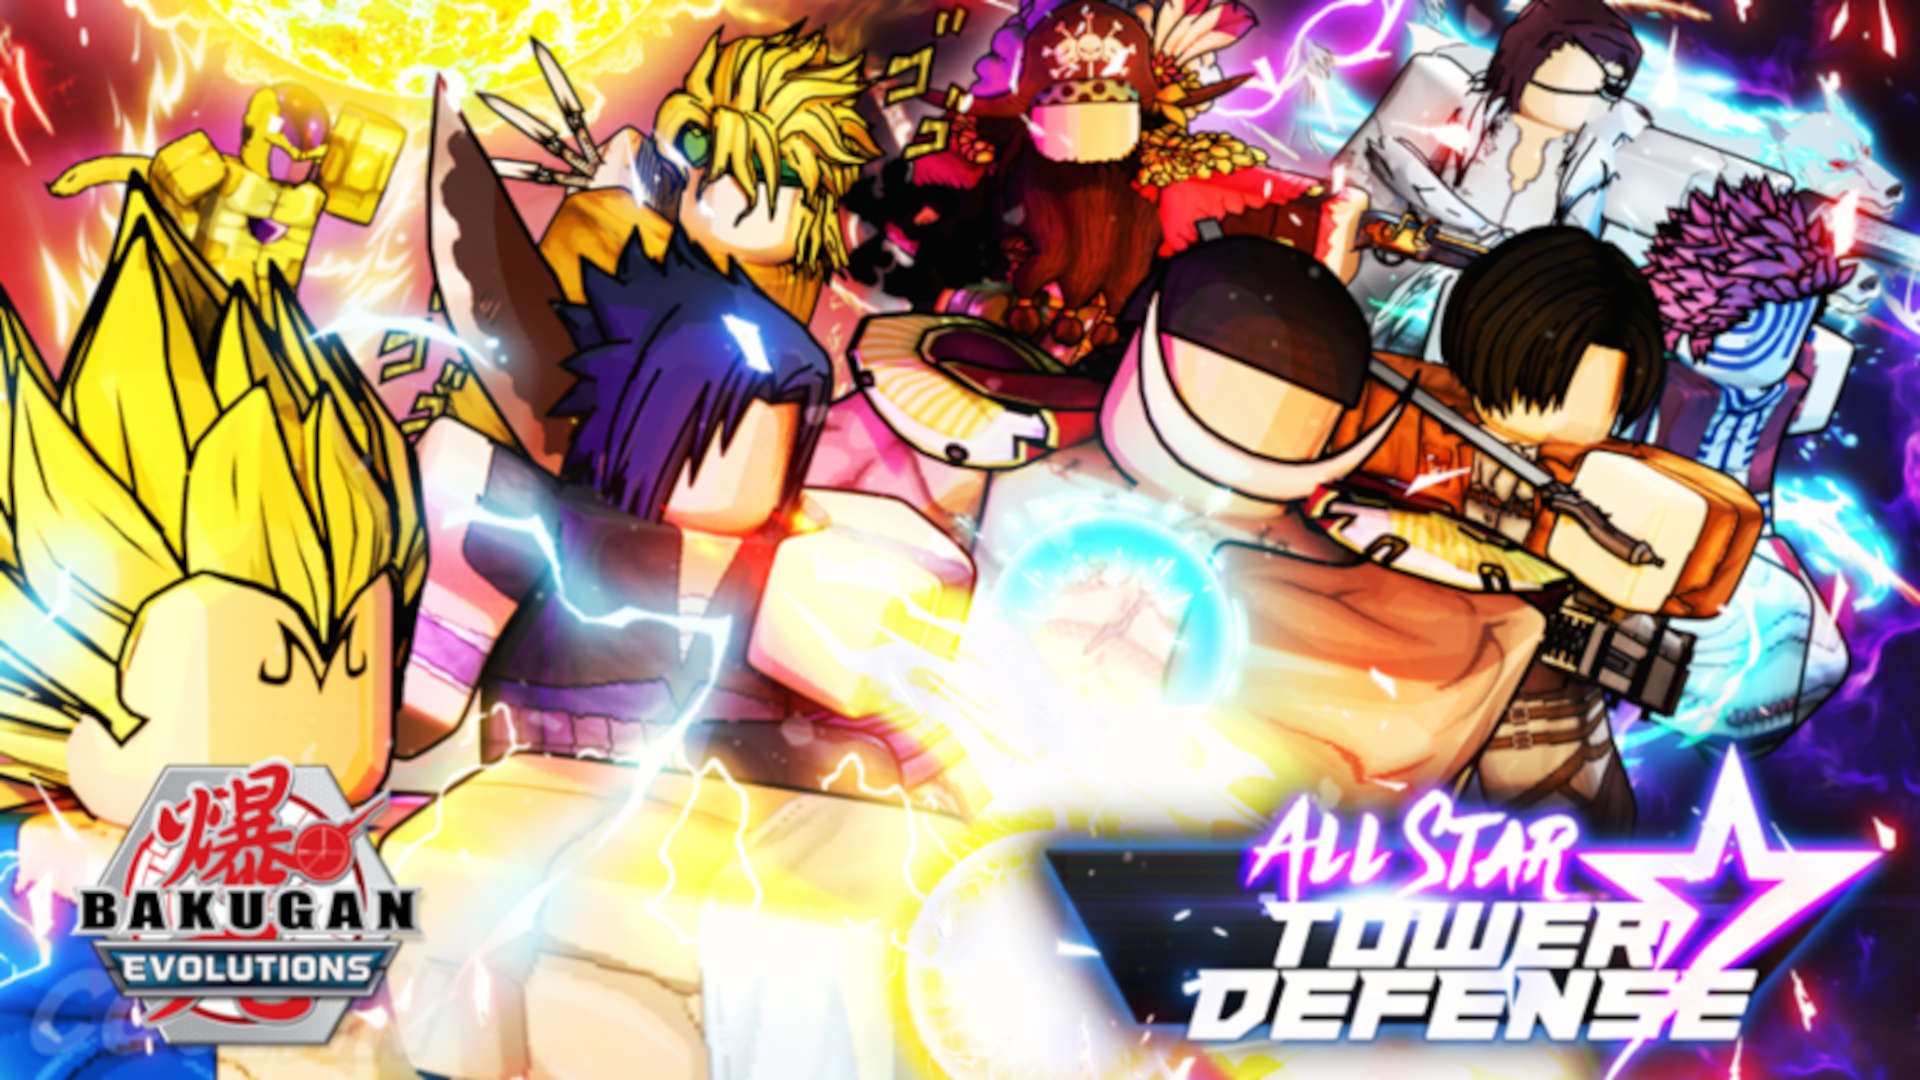 All Star Tower Defense characters and logo